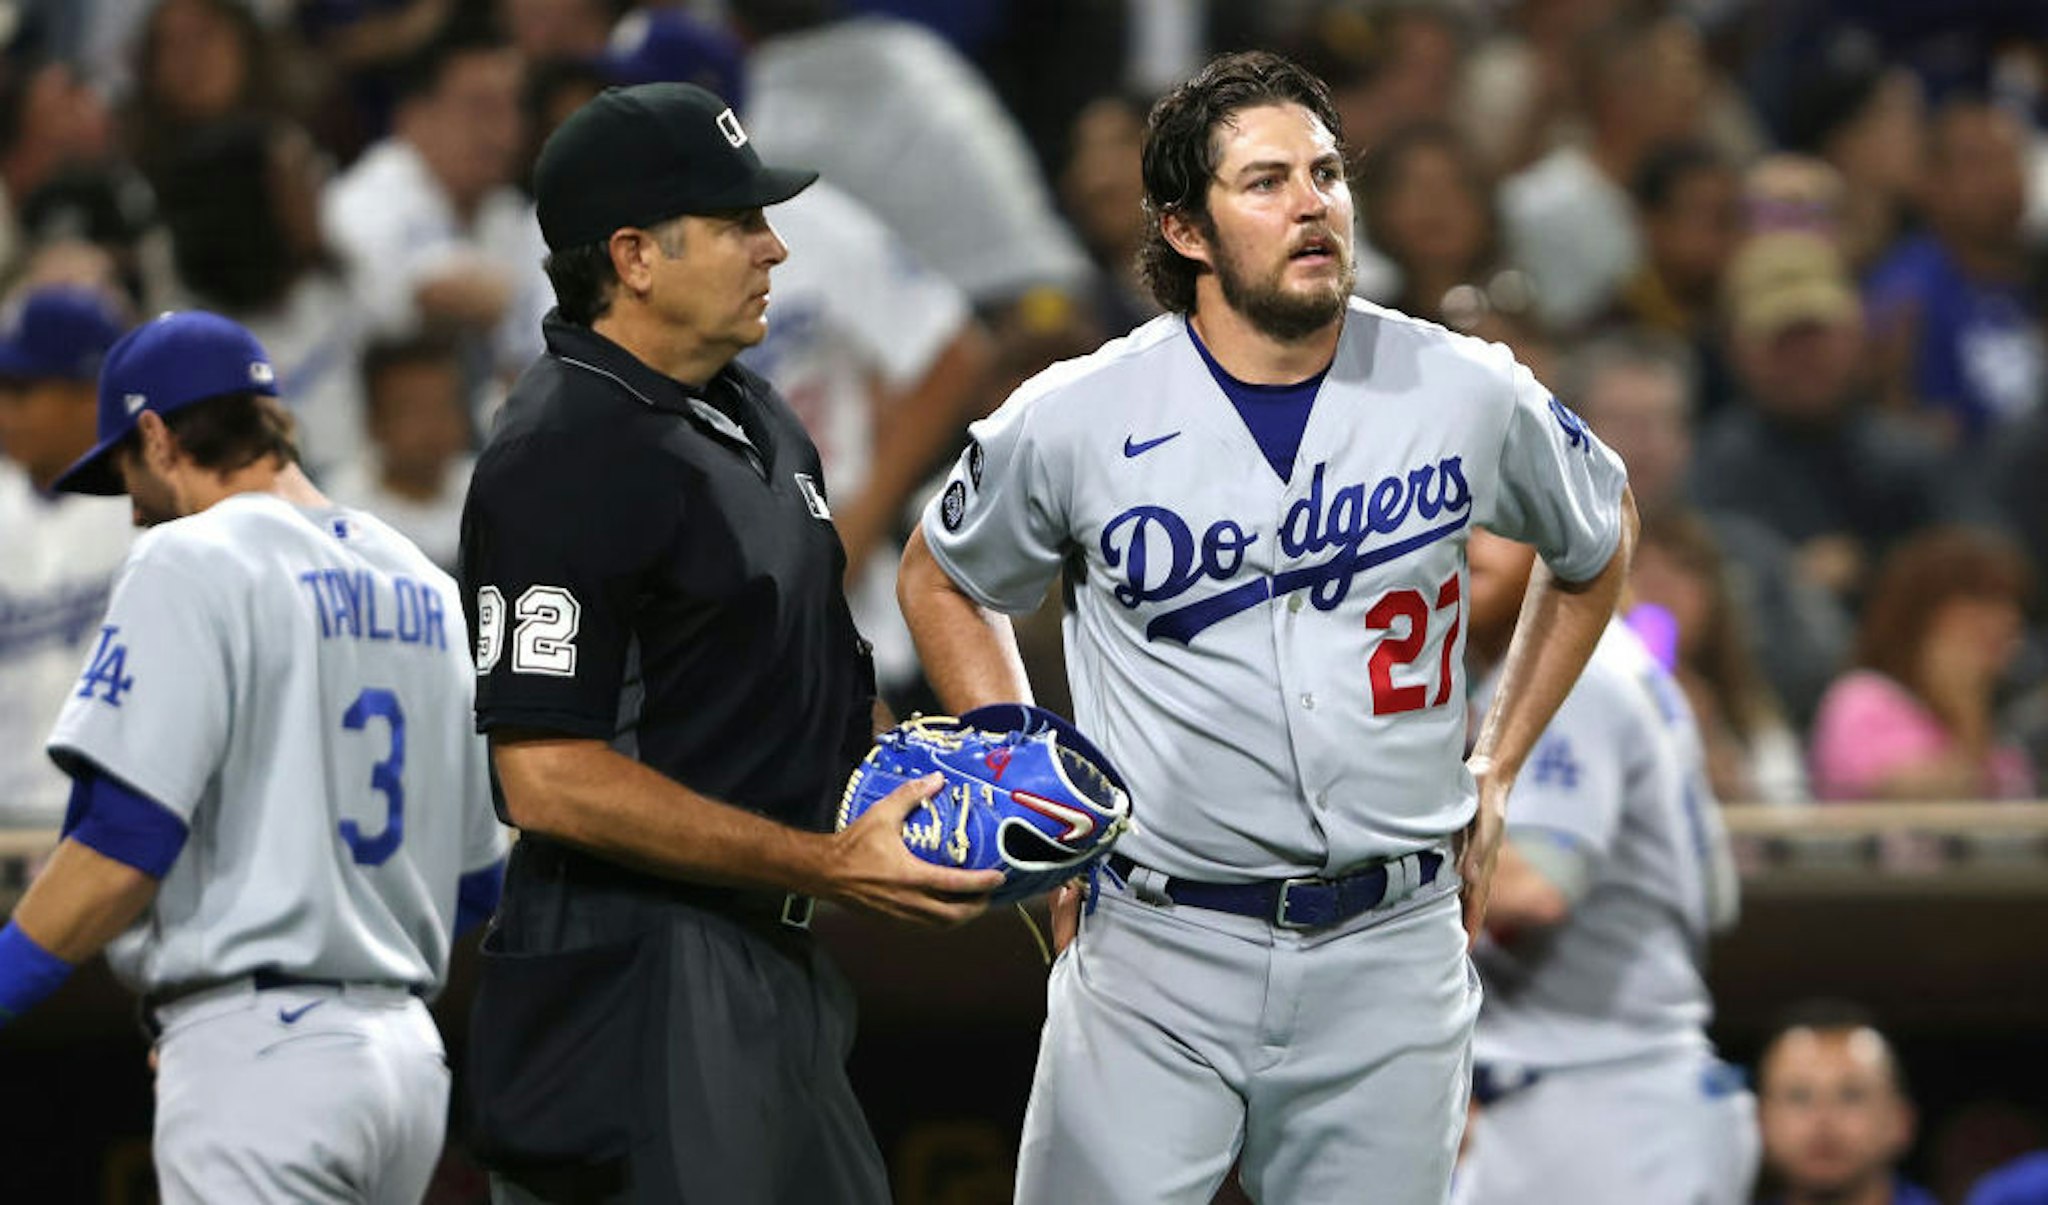 SAN DIEGO, CALIFORNIA - JUNE 23: Homeplate umpire James Hoye #92 checks the glove of Trevor Bauer #27 of the Los Angeles Dodgers during the fourth inning of a game against the Los Angeles Dodgers at PETCO Park on June 23, 2021 in San Diego, California. (Photo by Sean M. Haffey/Getty Images)